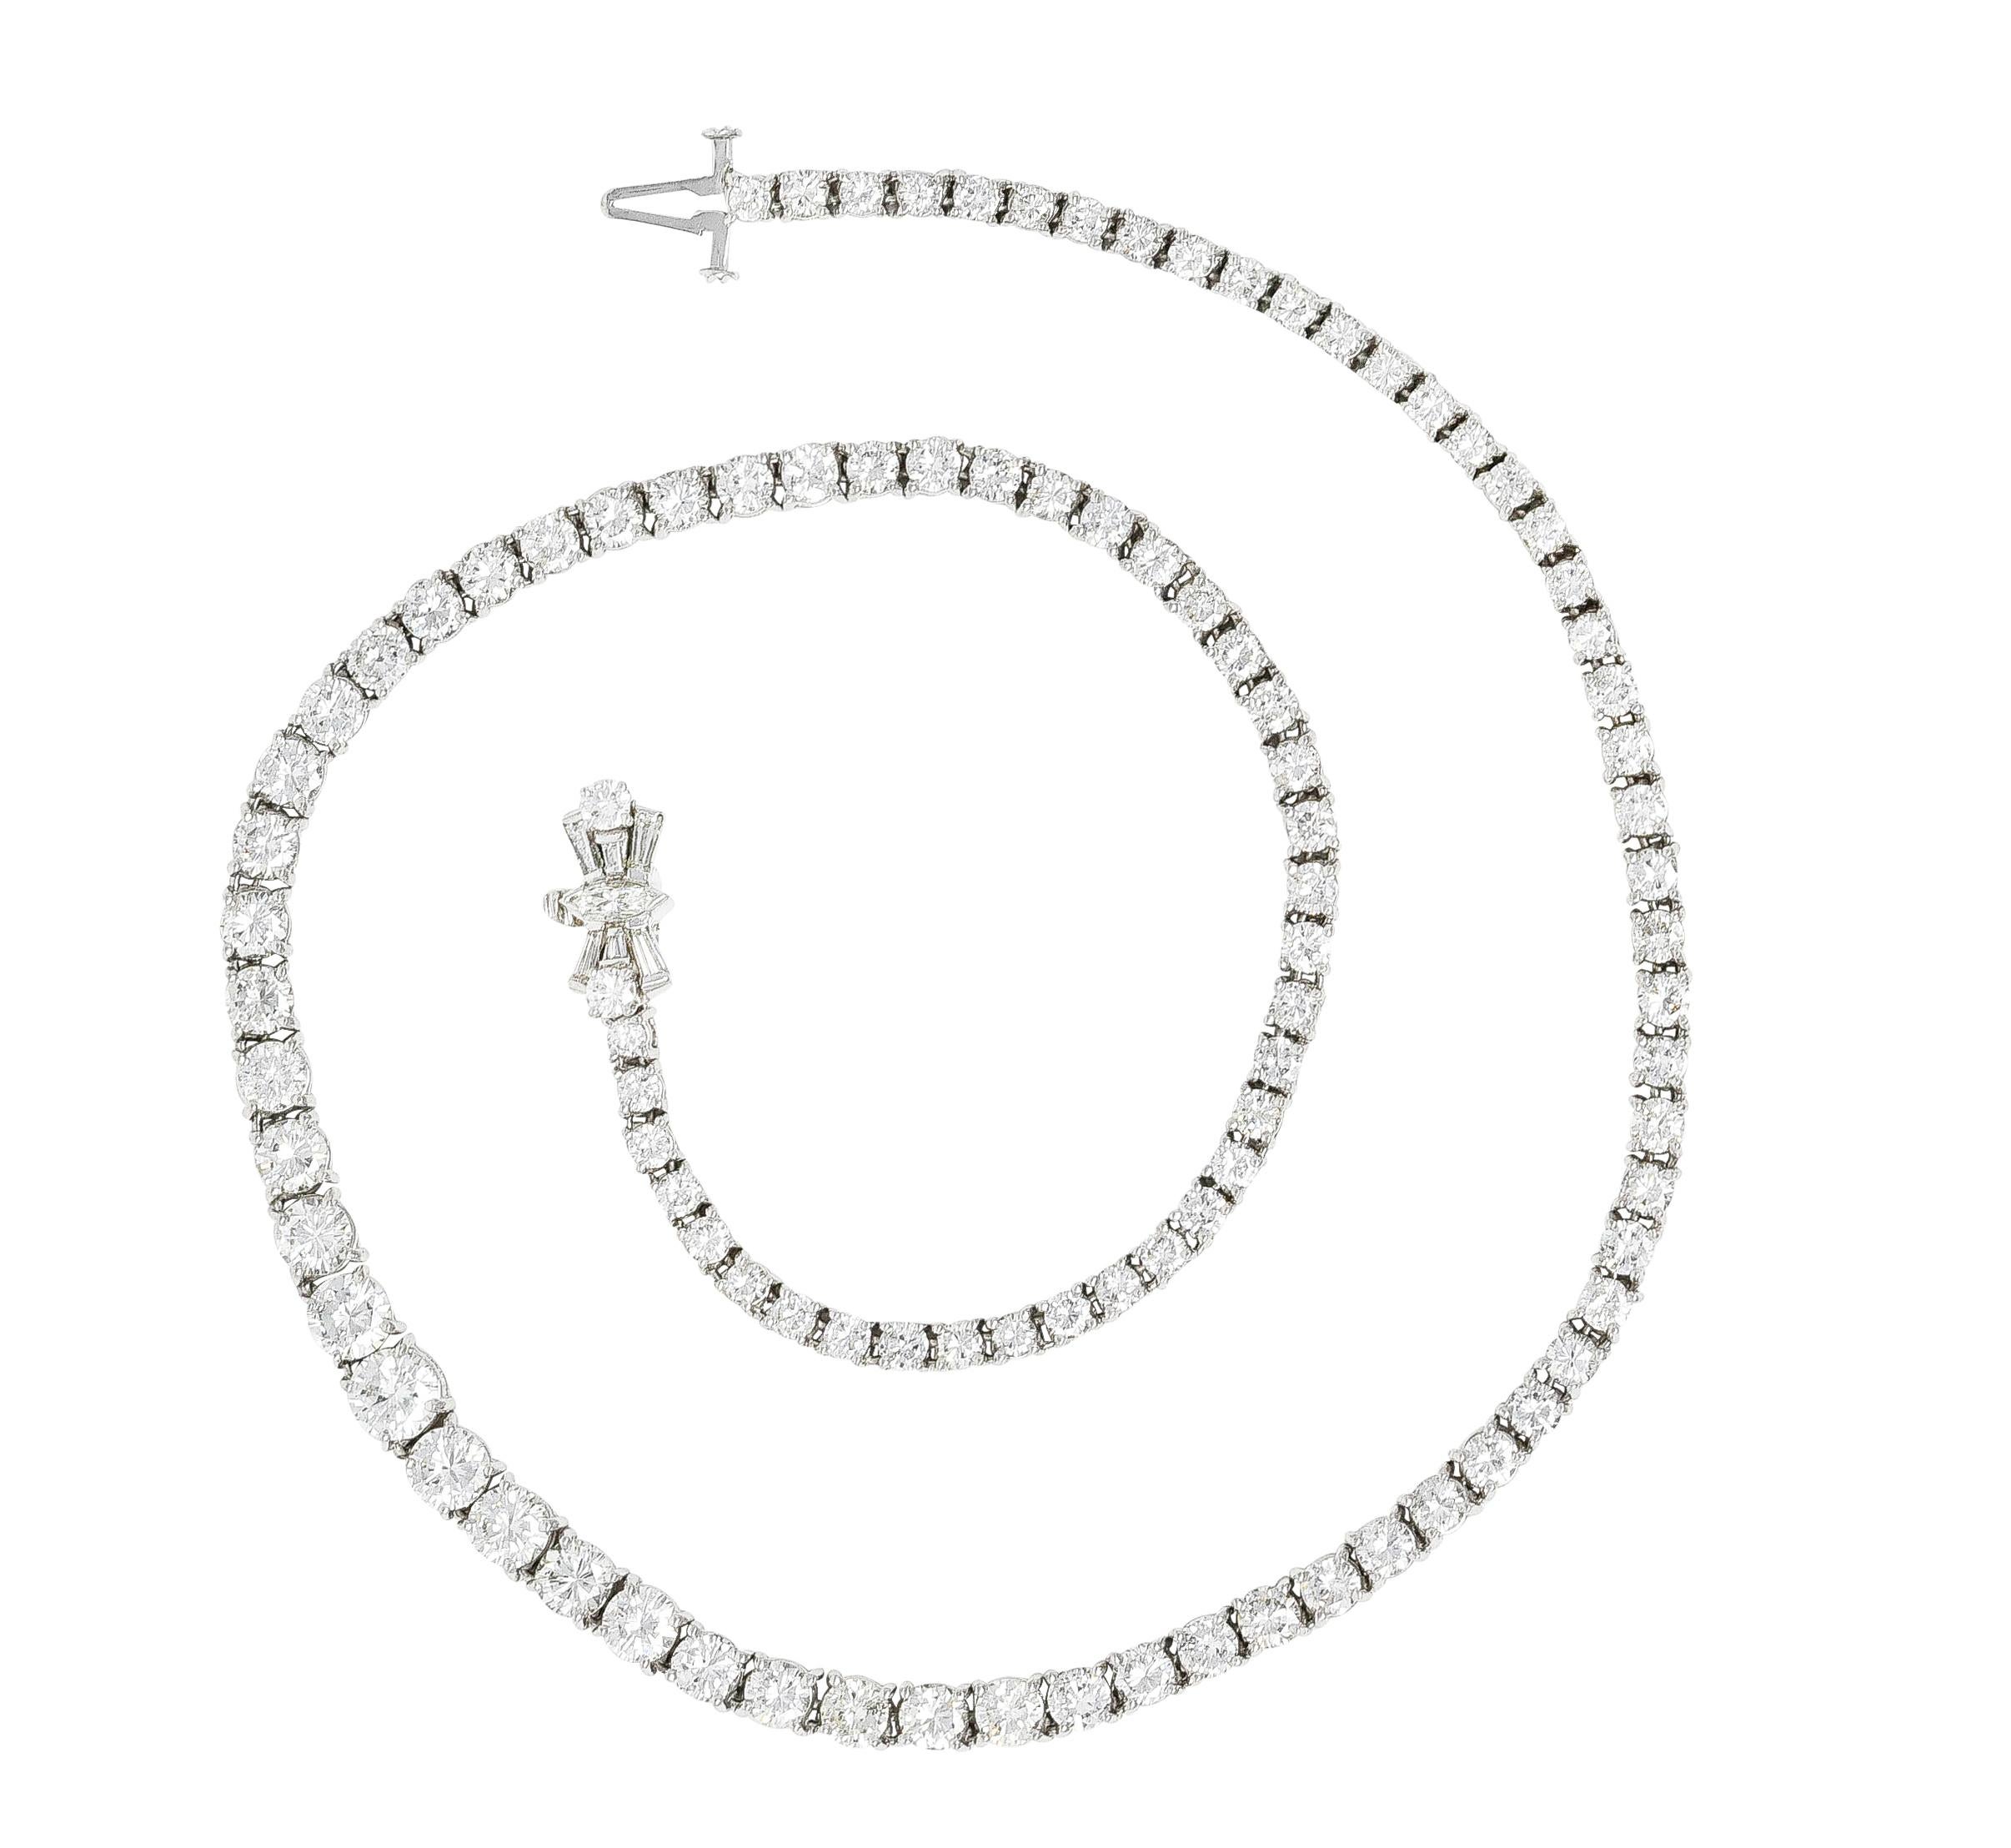 Designed as a graduated strand of prong set round brilliant cut diamonds. Center weighs approximately 0.55 carat total - H color with SI1 clarity. With additional round brilliant, navette, and baguette cut diamonds. Weighing approximately 13.60